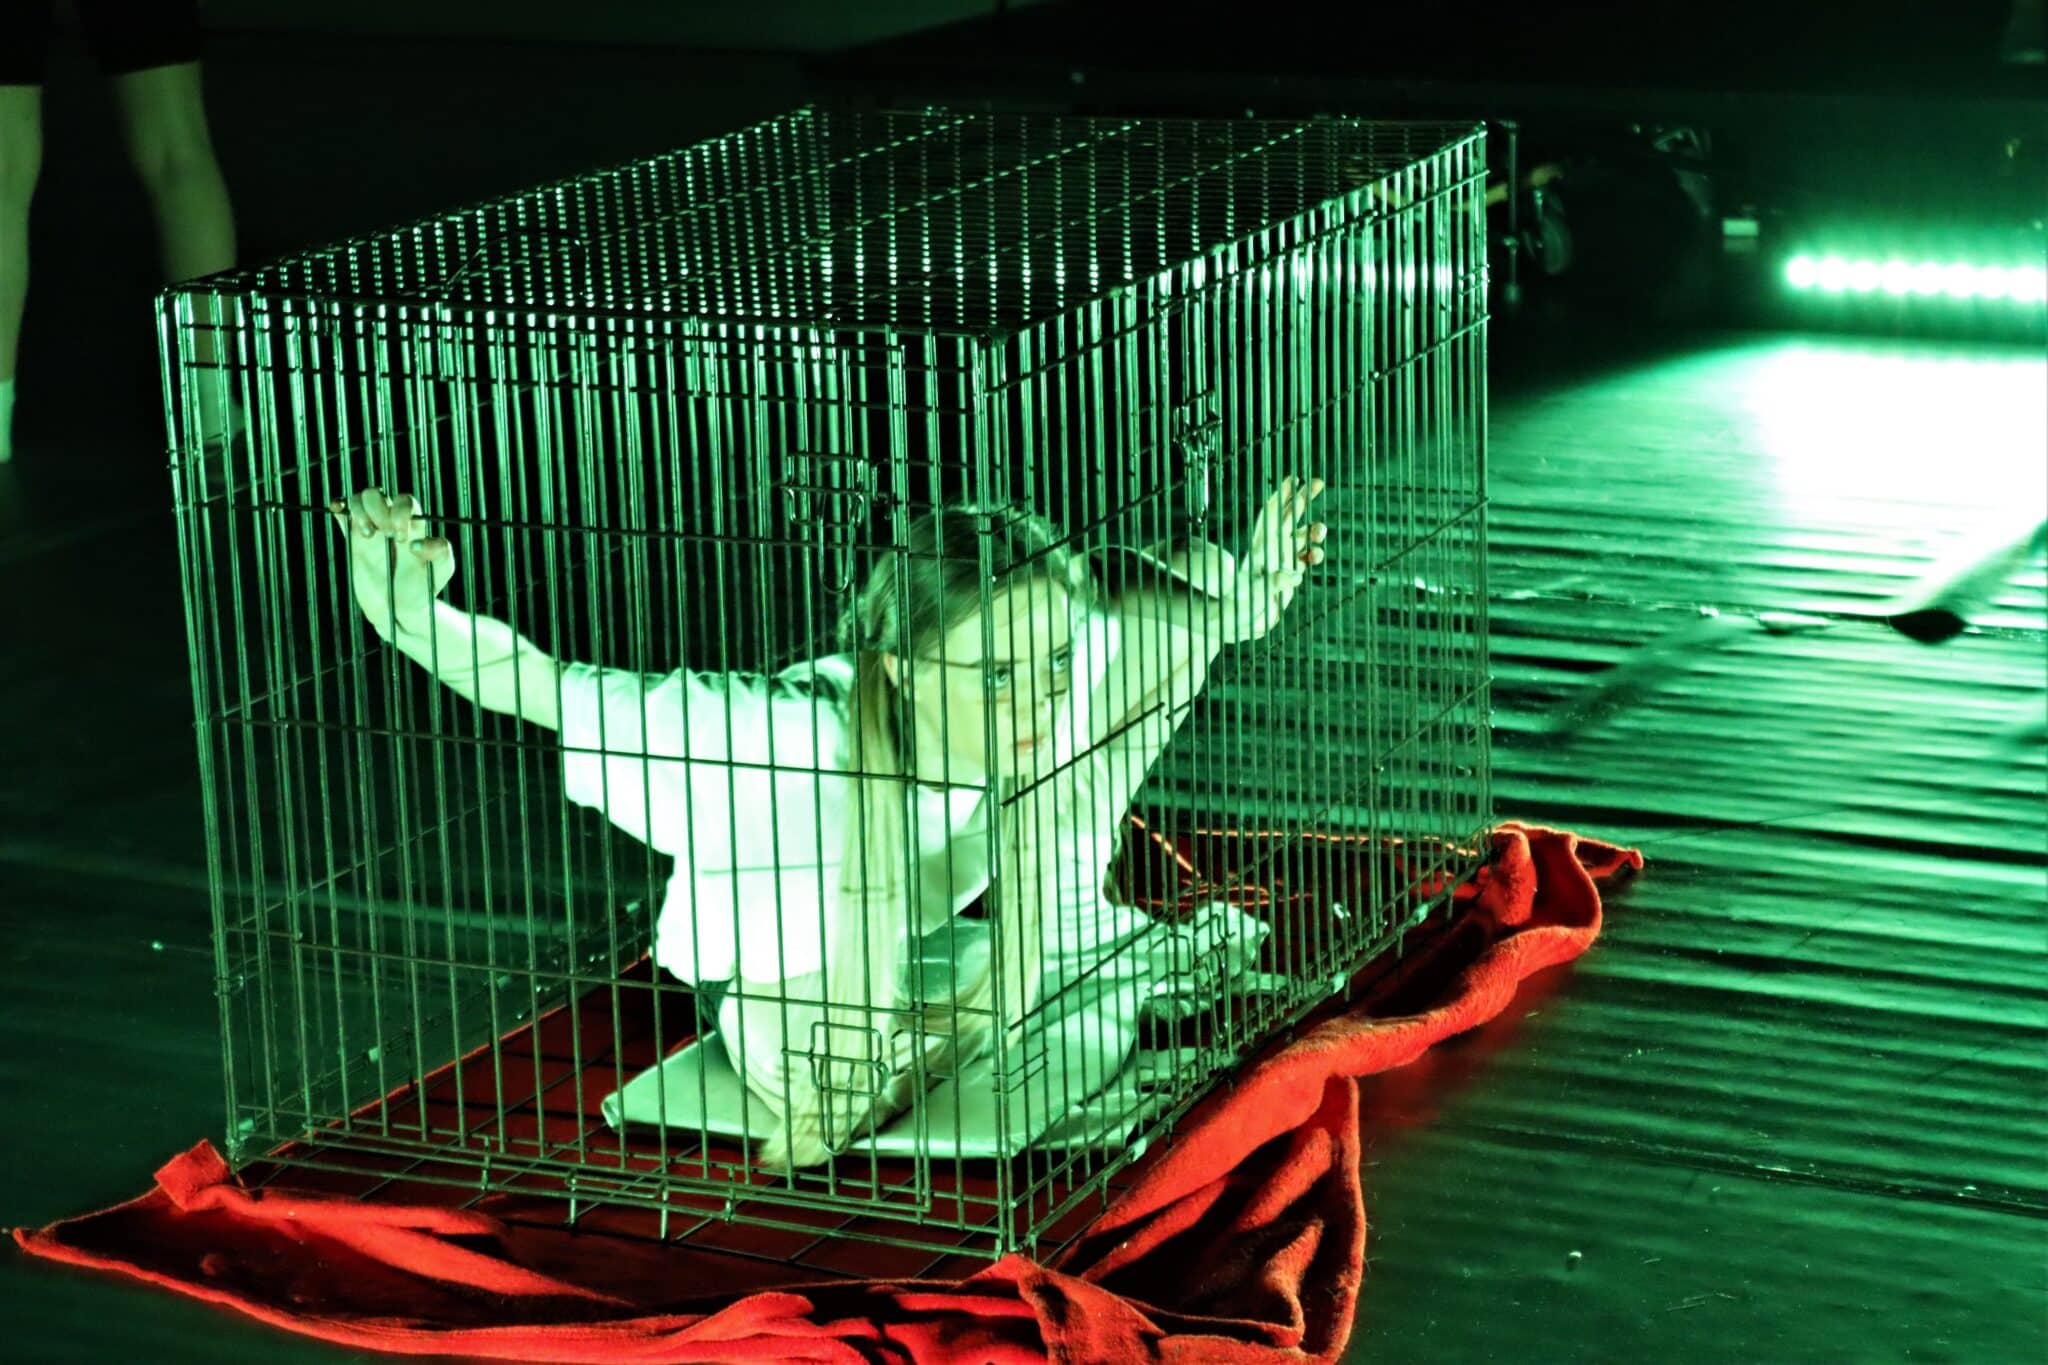 Dancer in cage